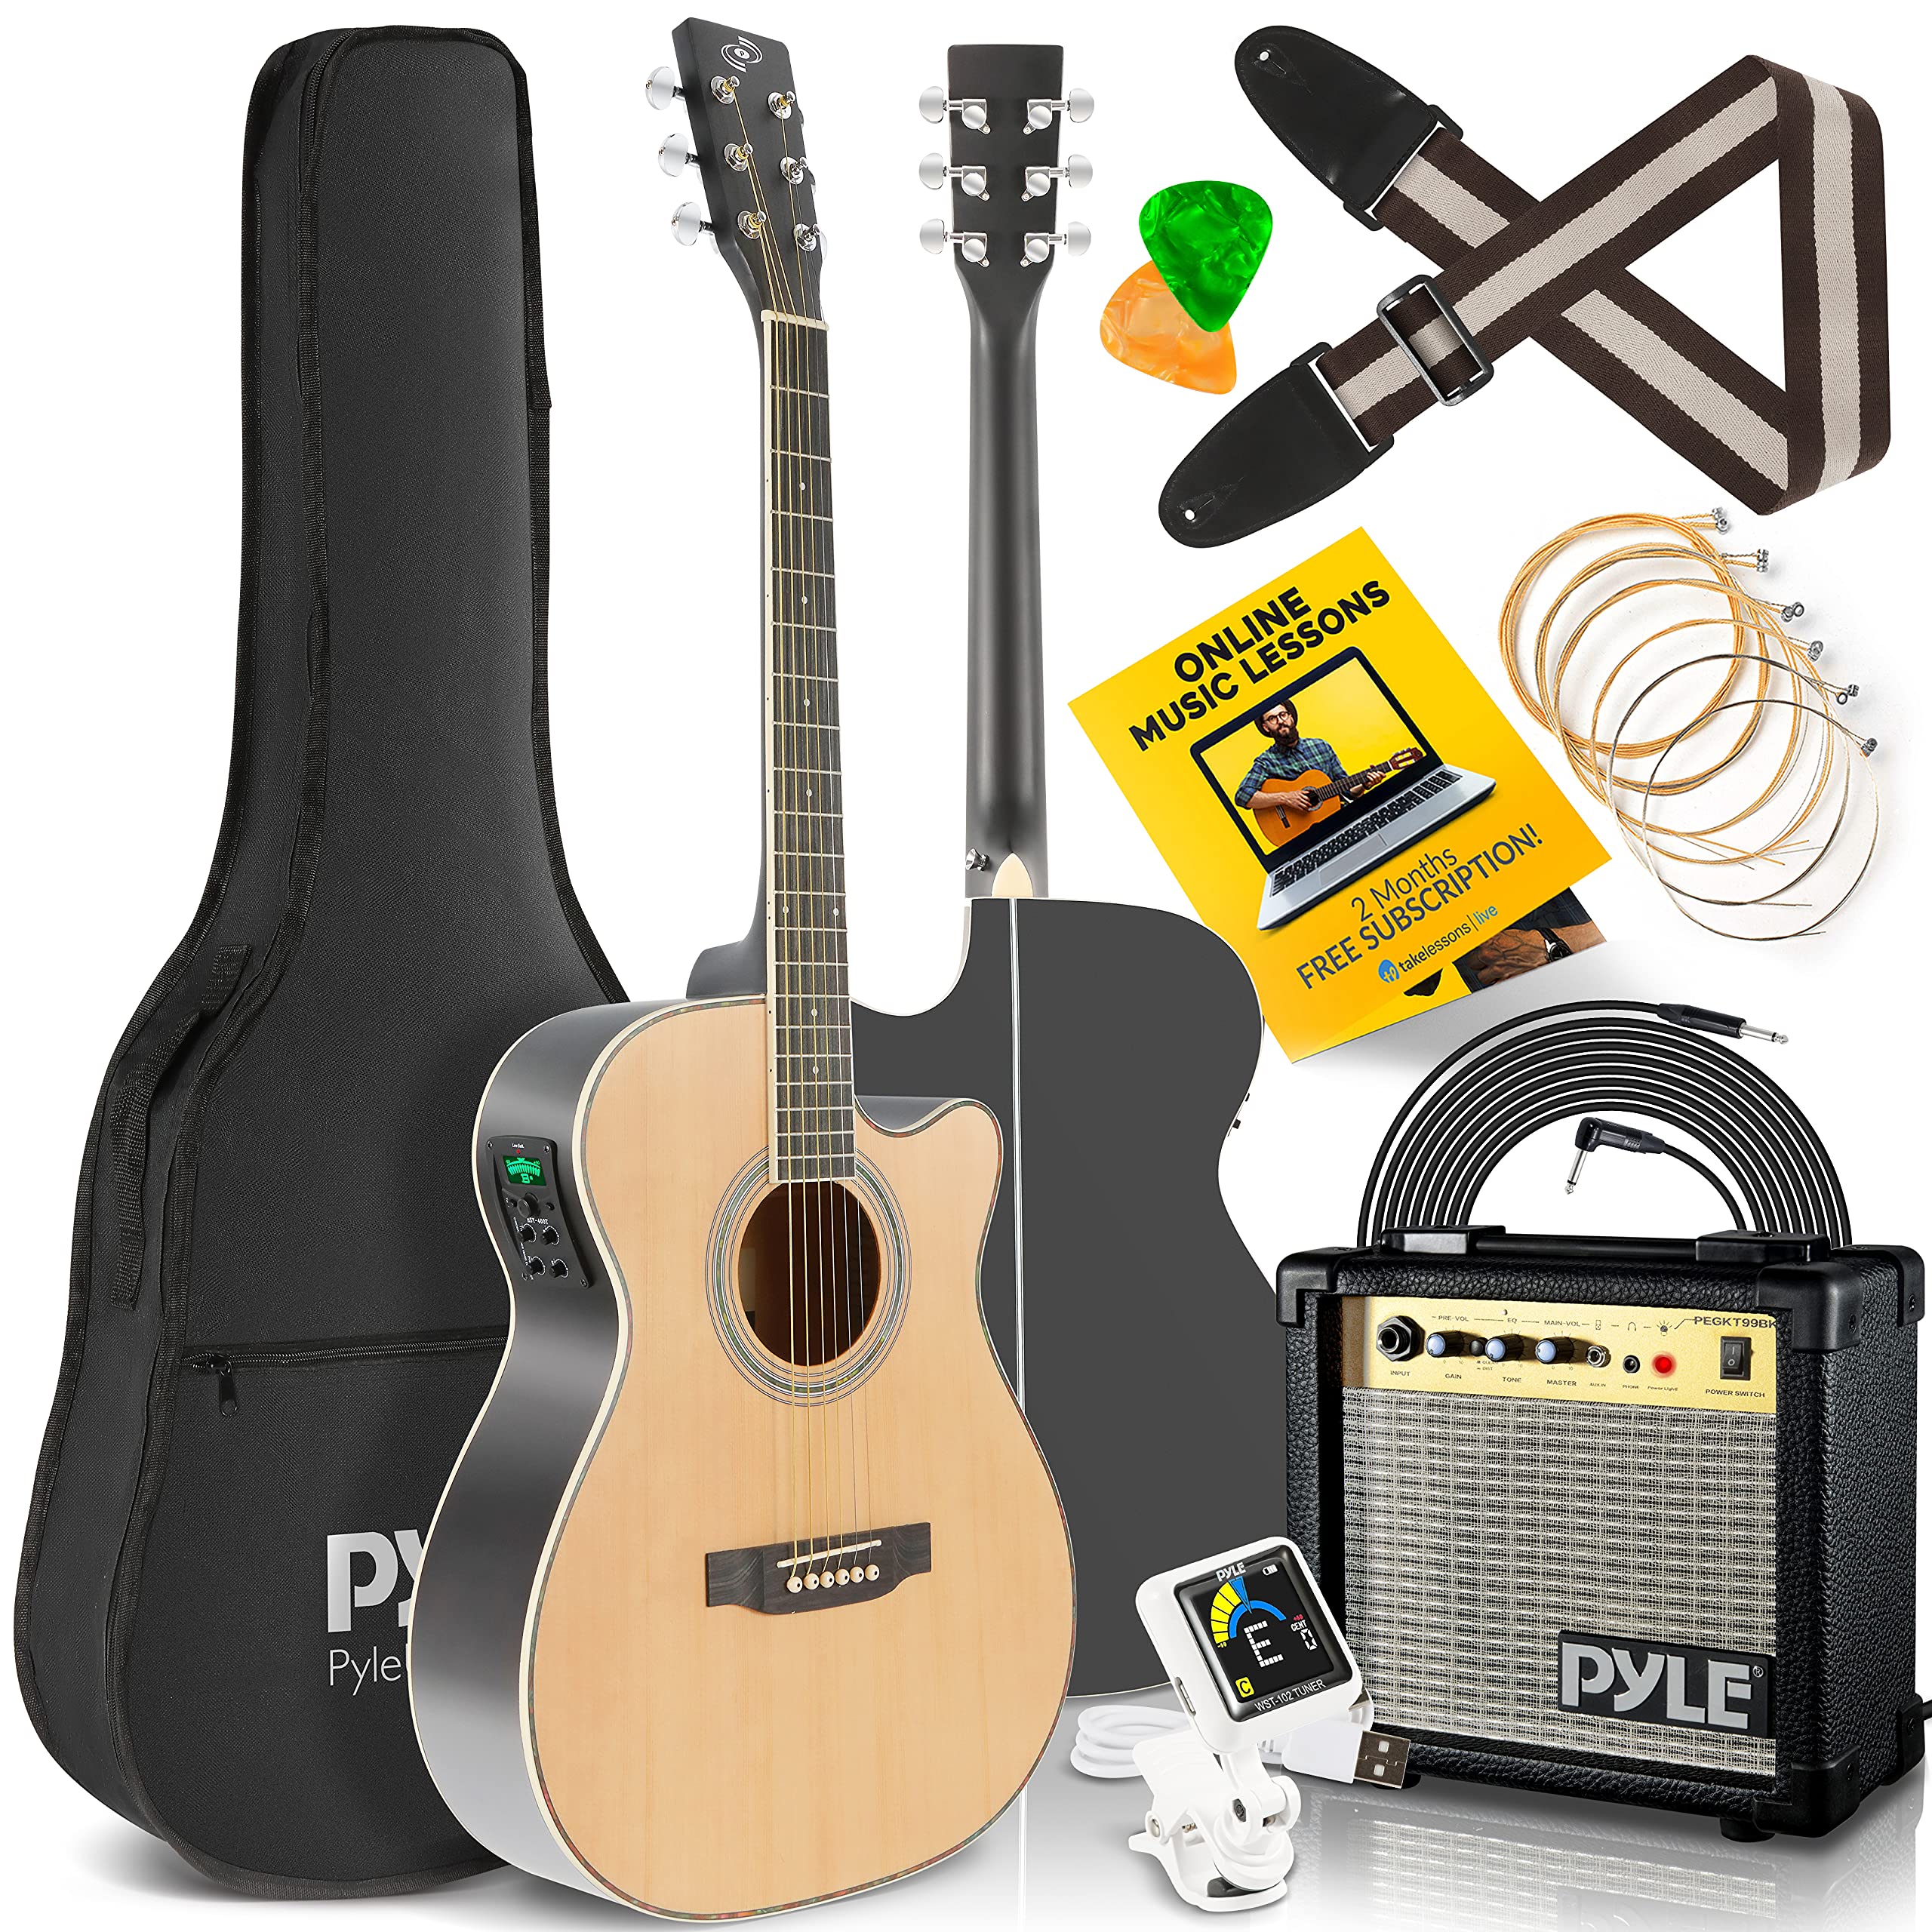 Pyle Acoustic Electric Cutaway Guitar and Amp Kit Full Scale 41” Steel String Spruce Wood w/Gig Bag, 4-Band EQ, Clip On and Onboard Tuner, Picks, Shoulder Strap for Beginners and Students